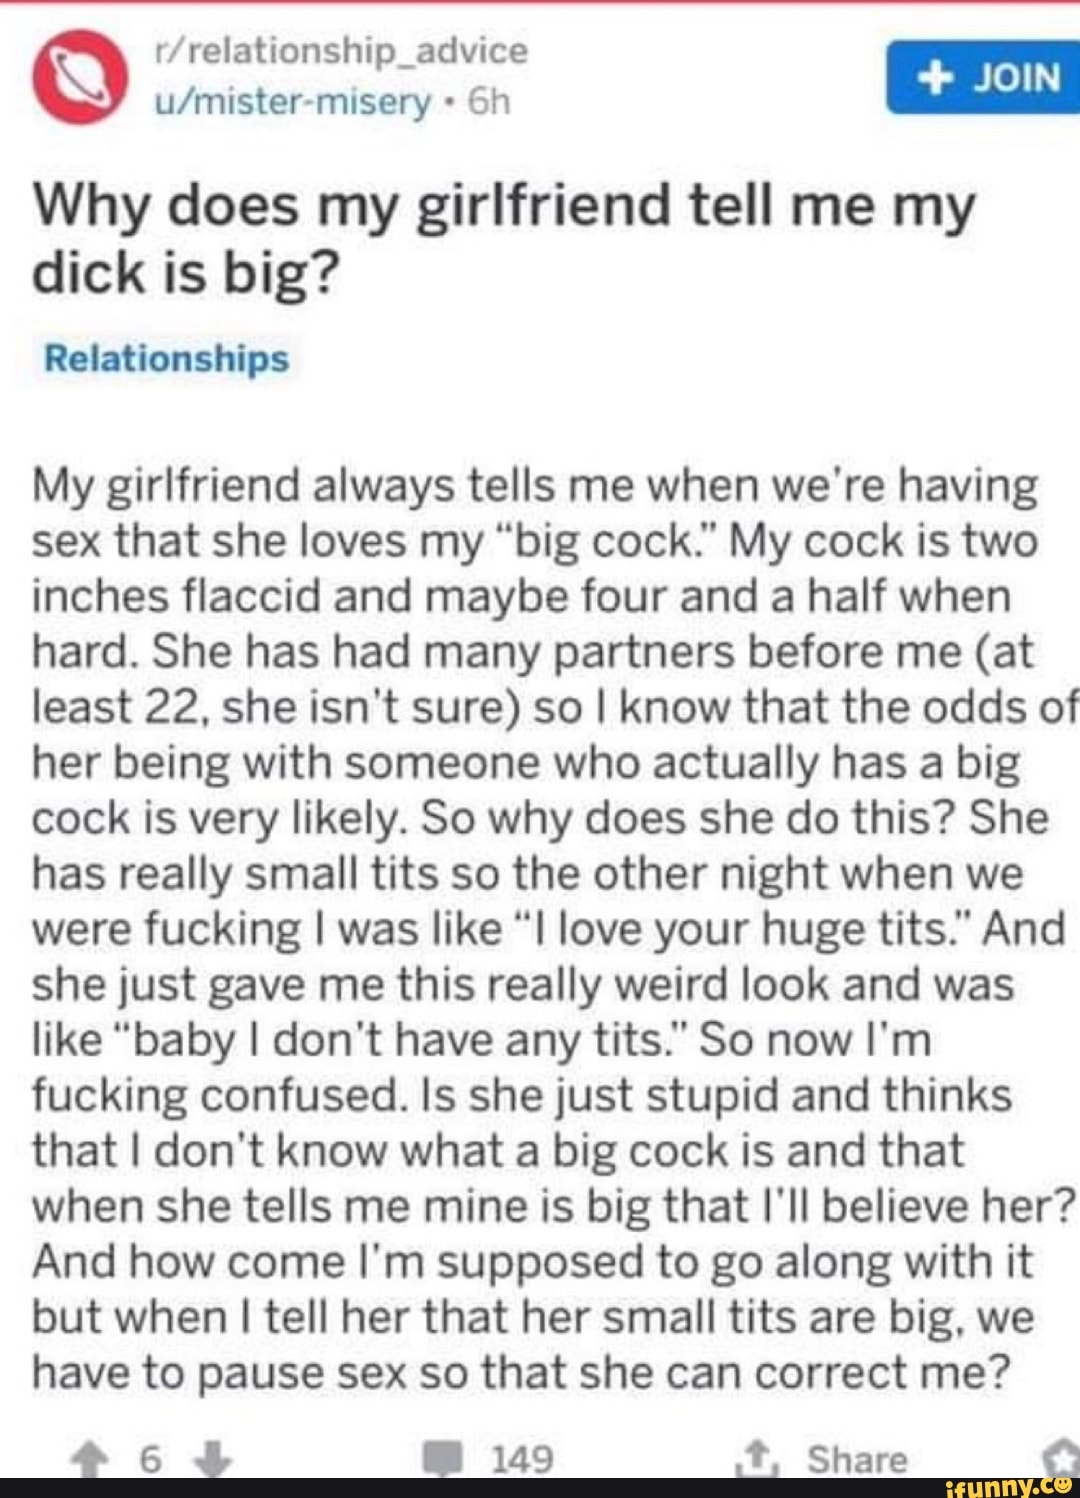 R/relationship_advice Q u/mister-misery Why does my girlfriend tell me my dick is big?